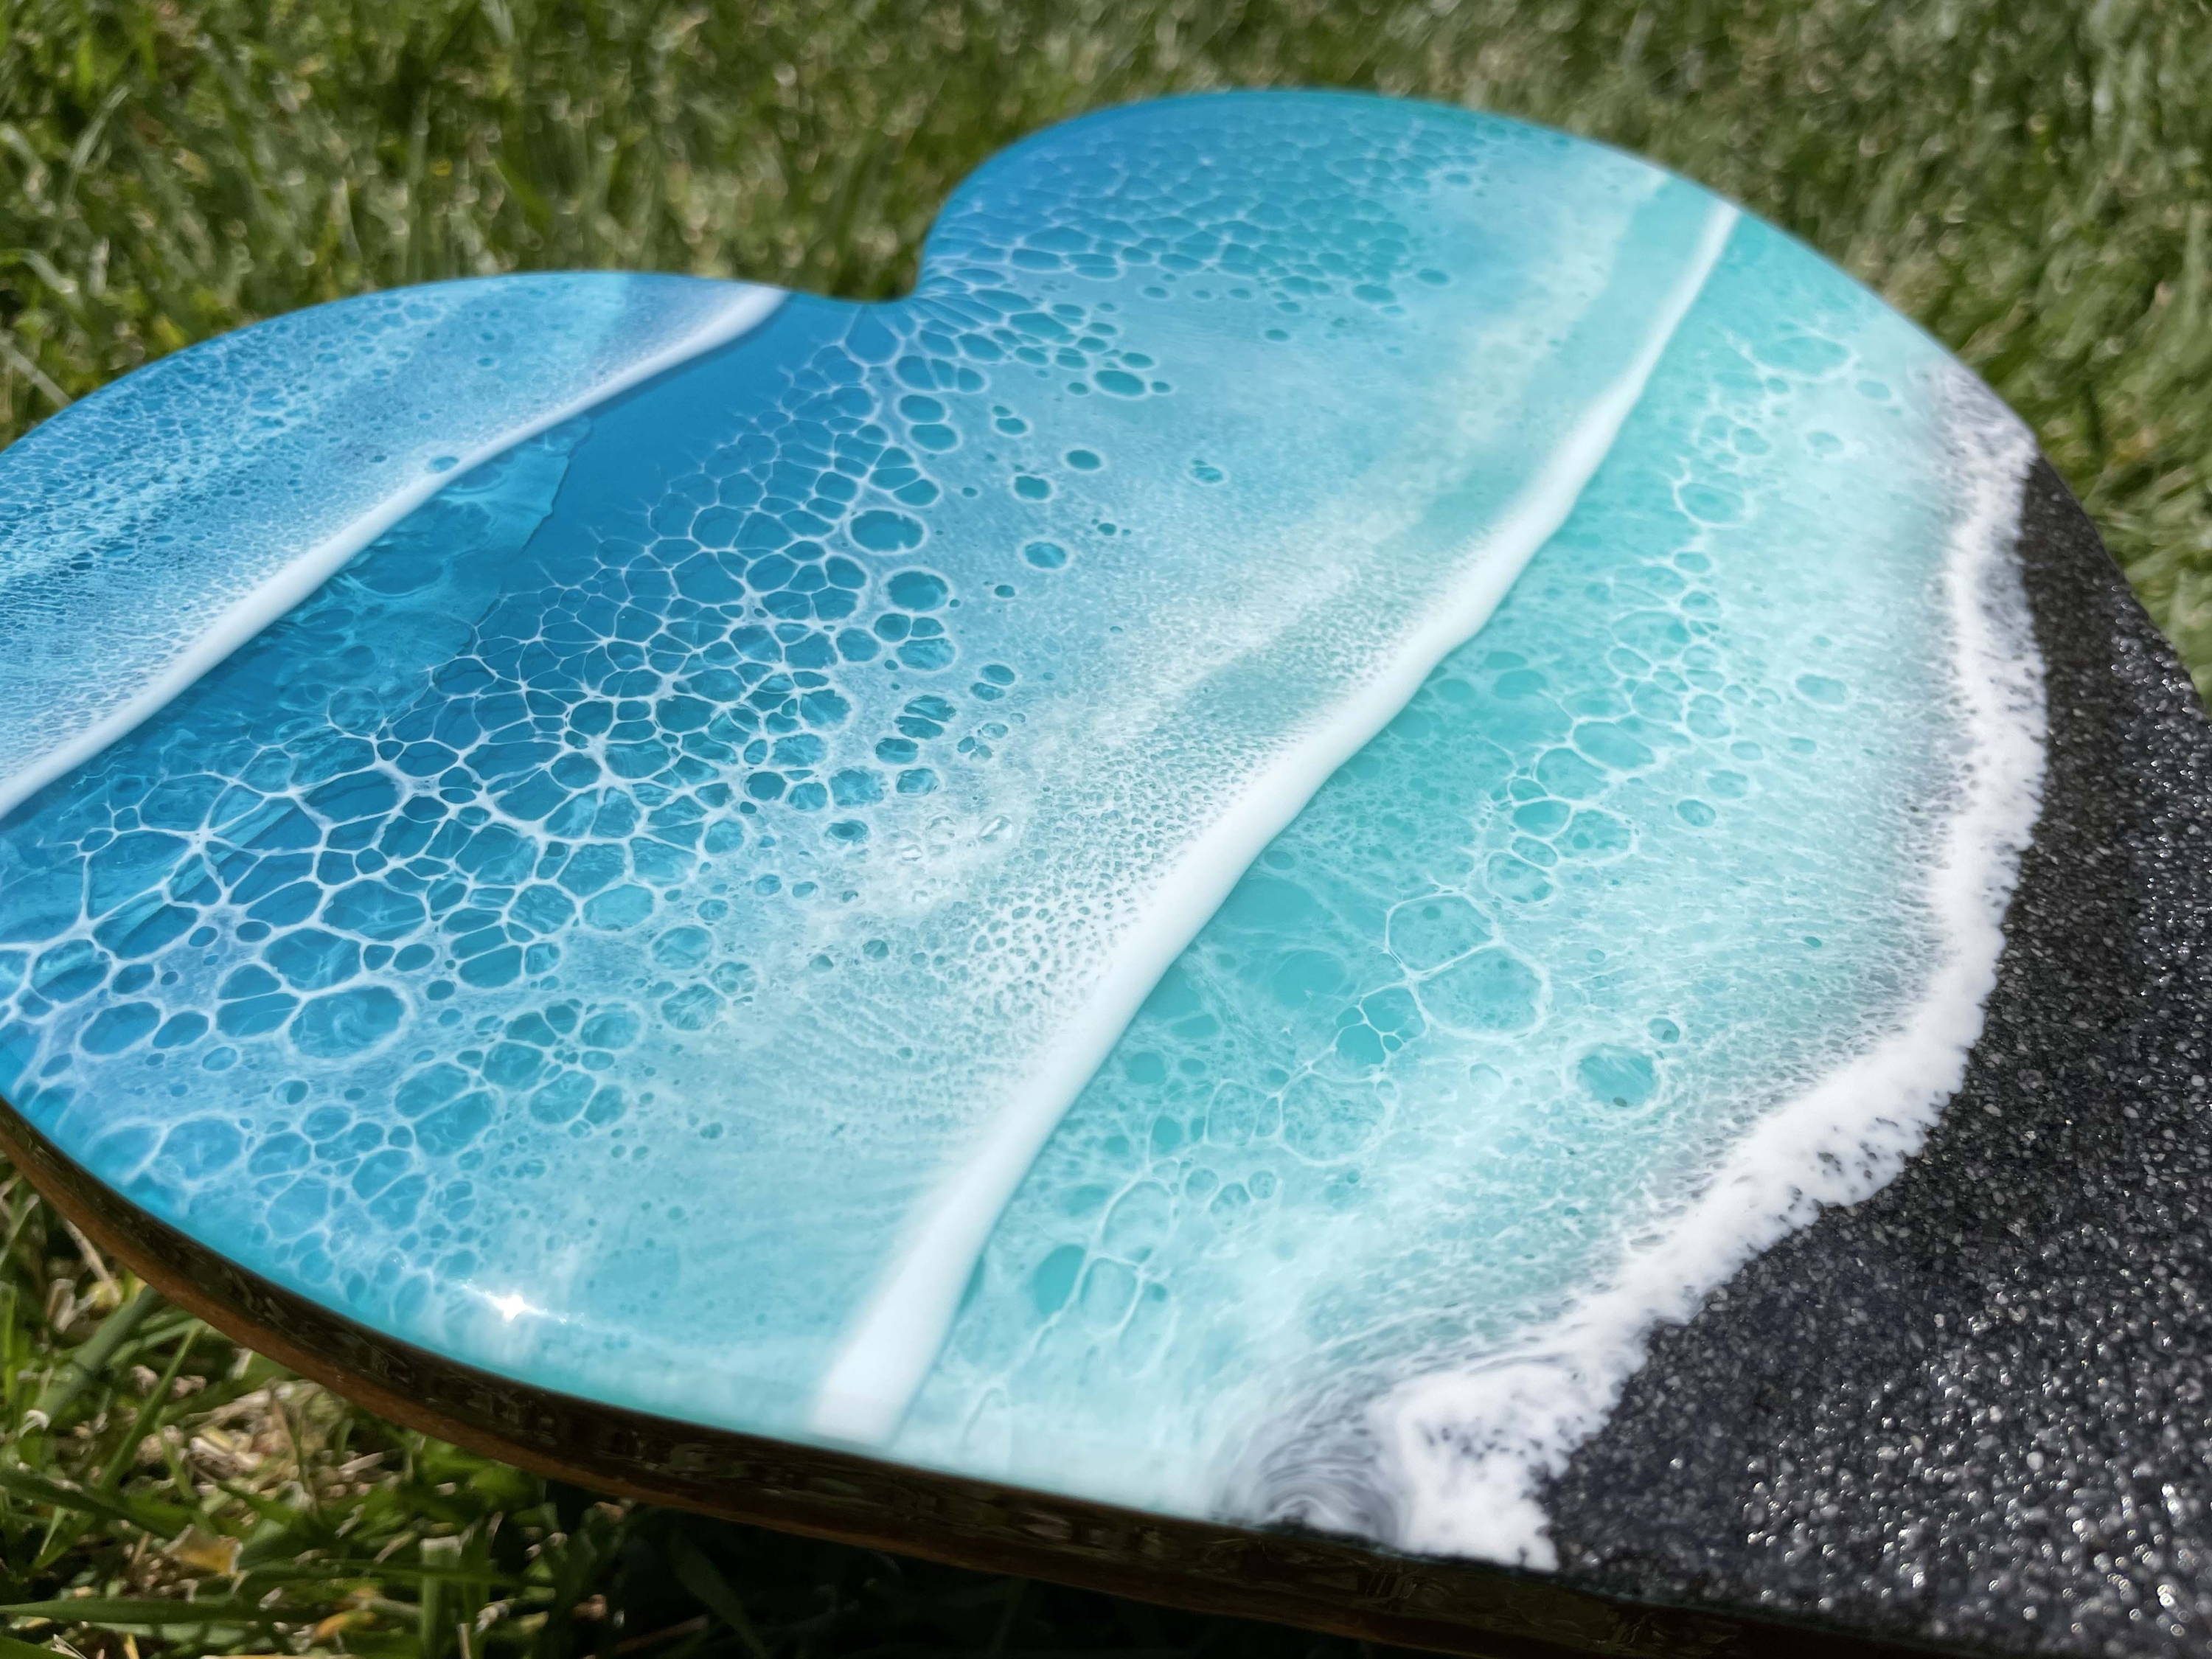 1568 You Won't Believe How EASY It Is To Make Resin Waves 